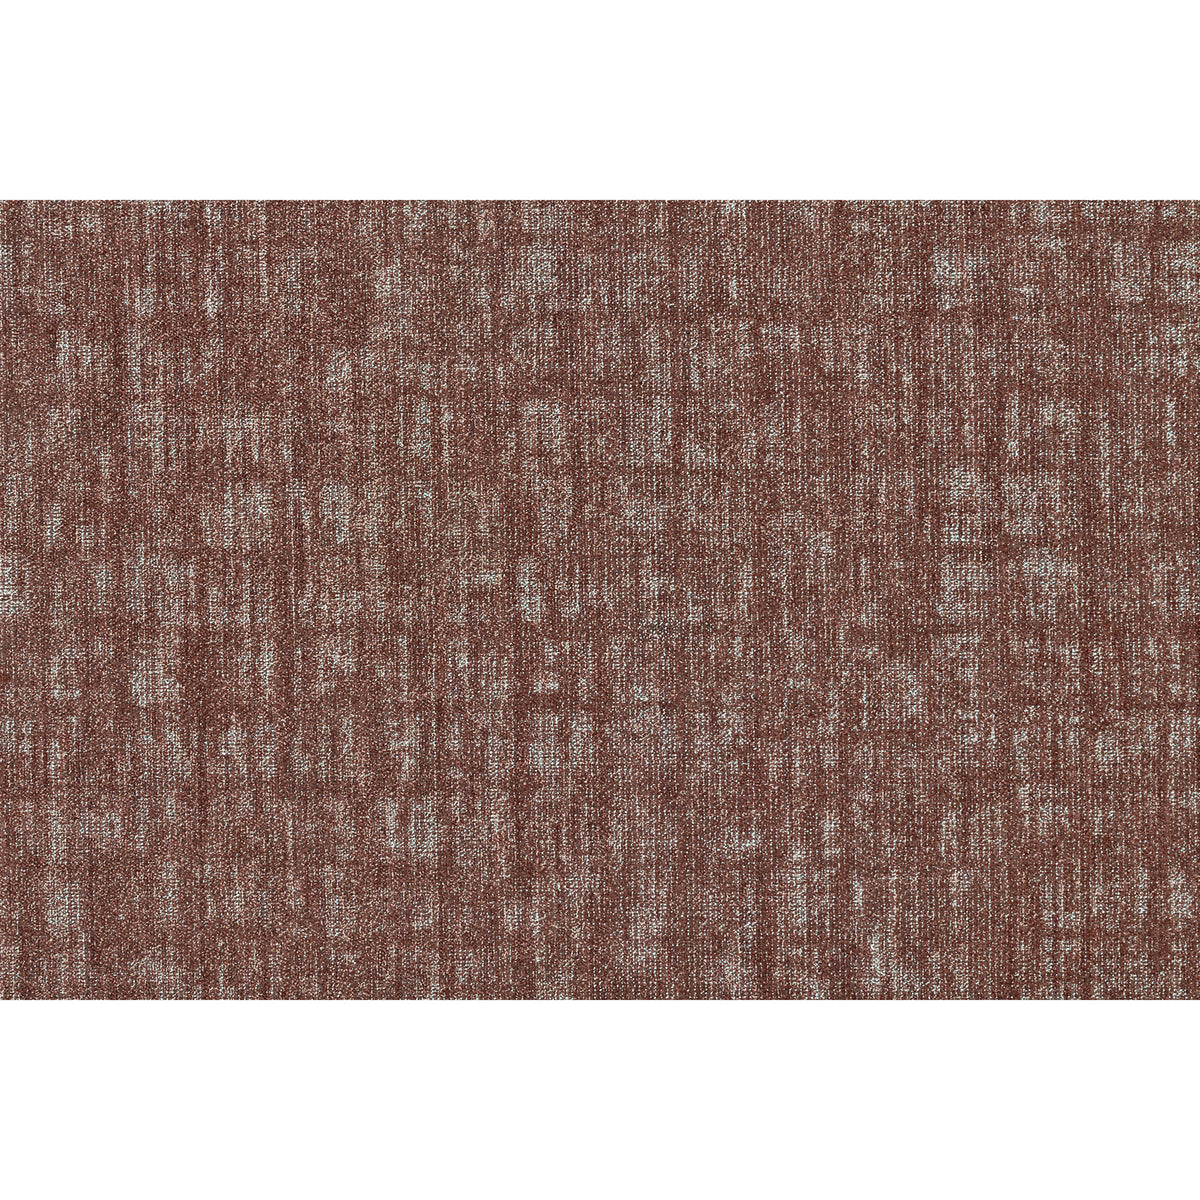 Shaw Contract - Modern Edit - Edition - Carpet Tile - Umber